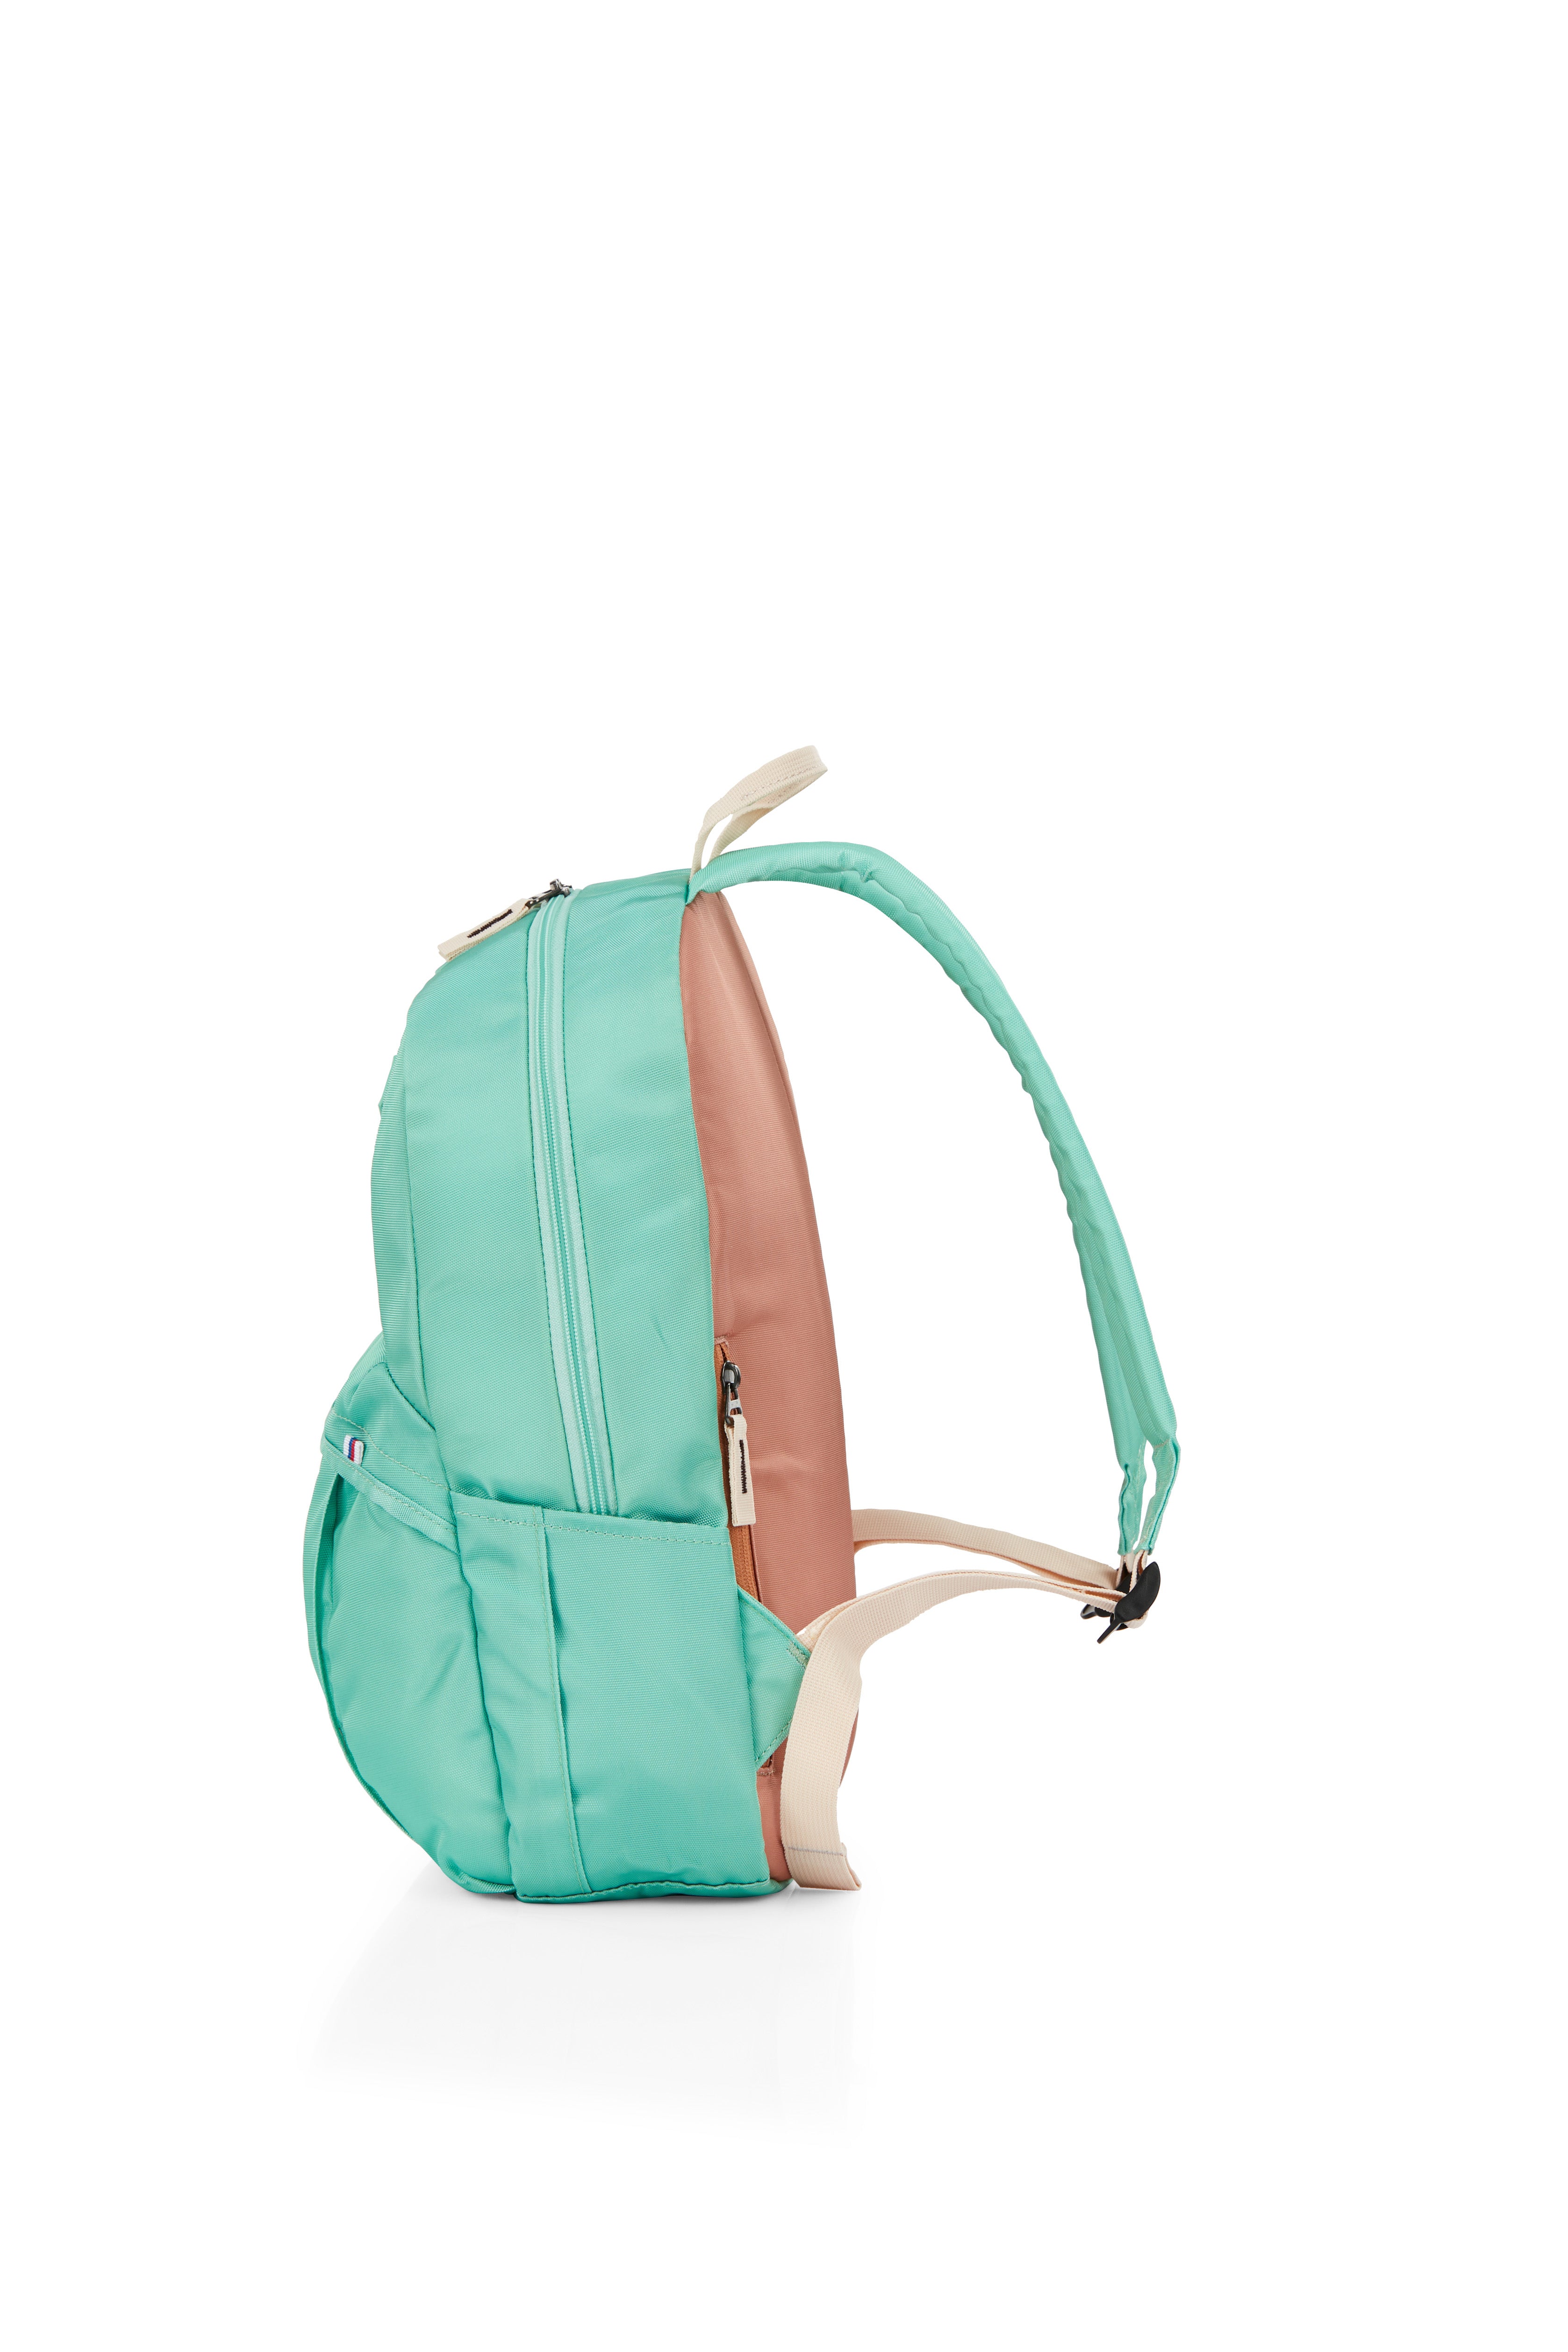 American Tourister - RUDY Small Fashion Backpack - Ice Mint-3